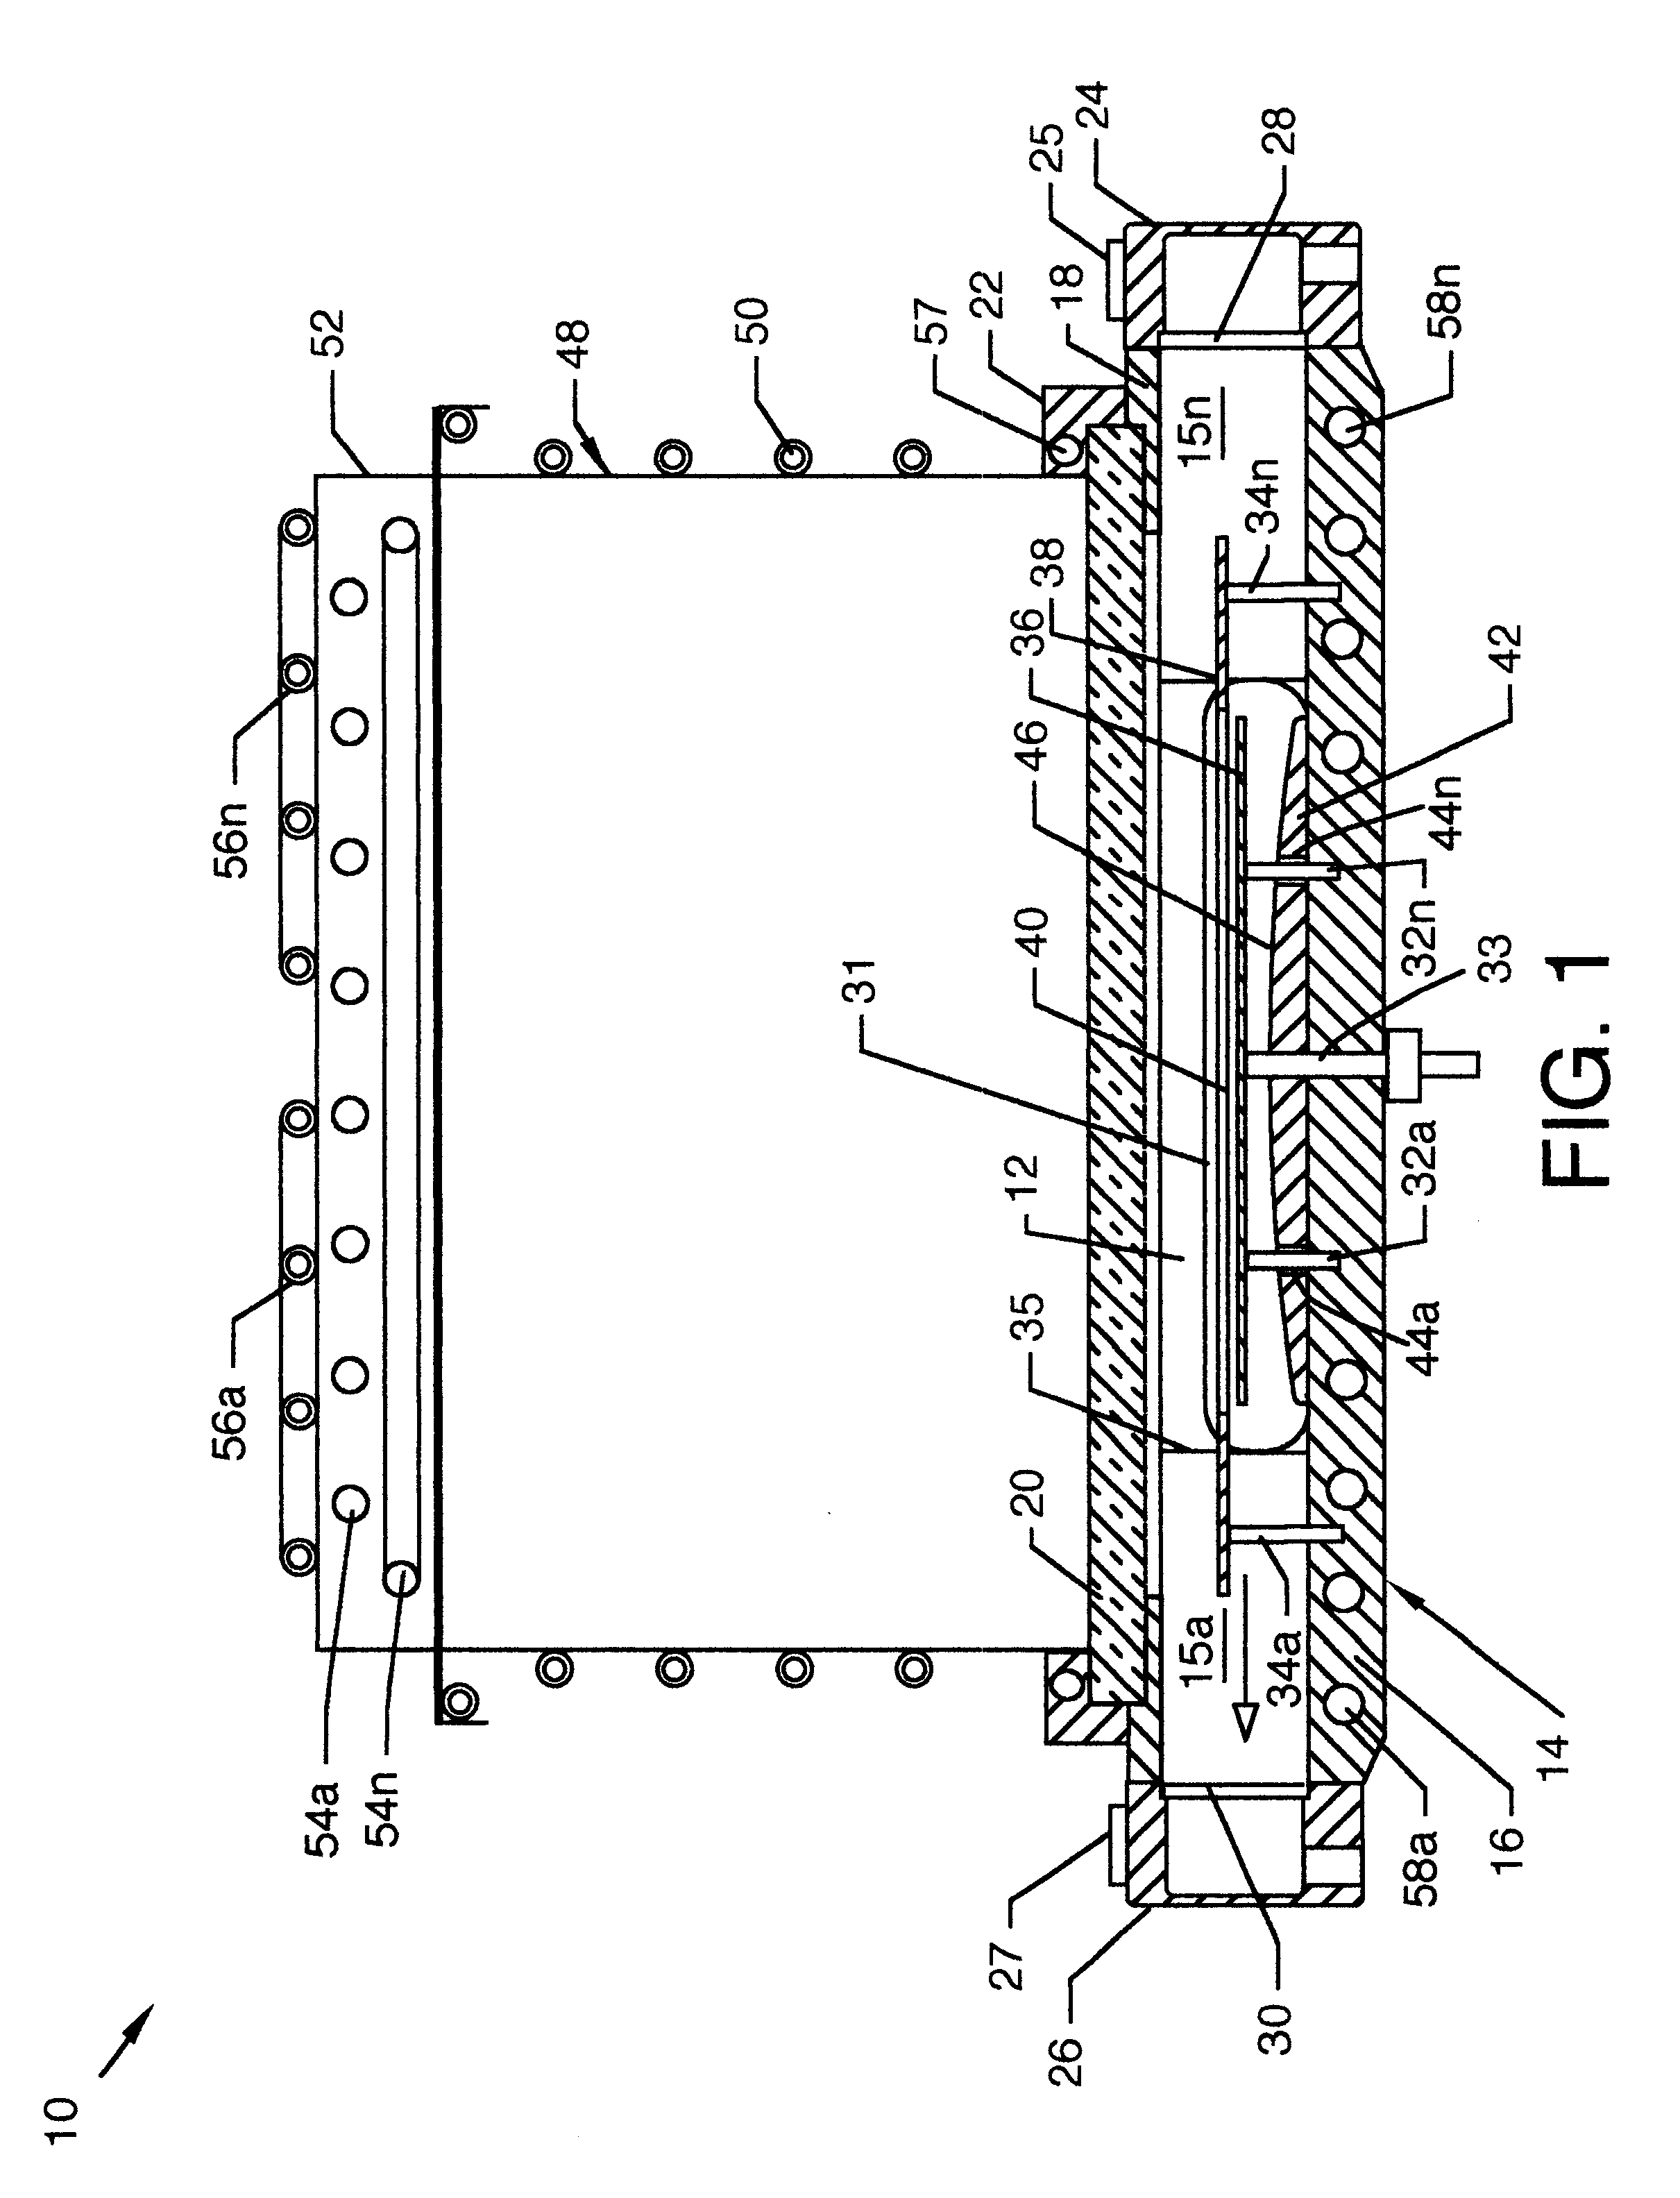 Method and apparatus for uniform direct radiant heating in a rapid thermal processing reactor